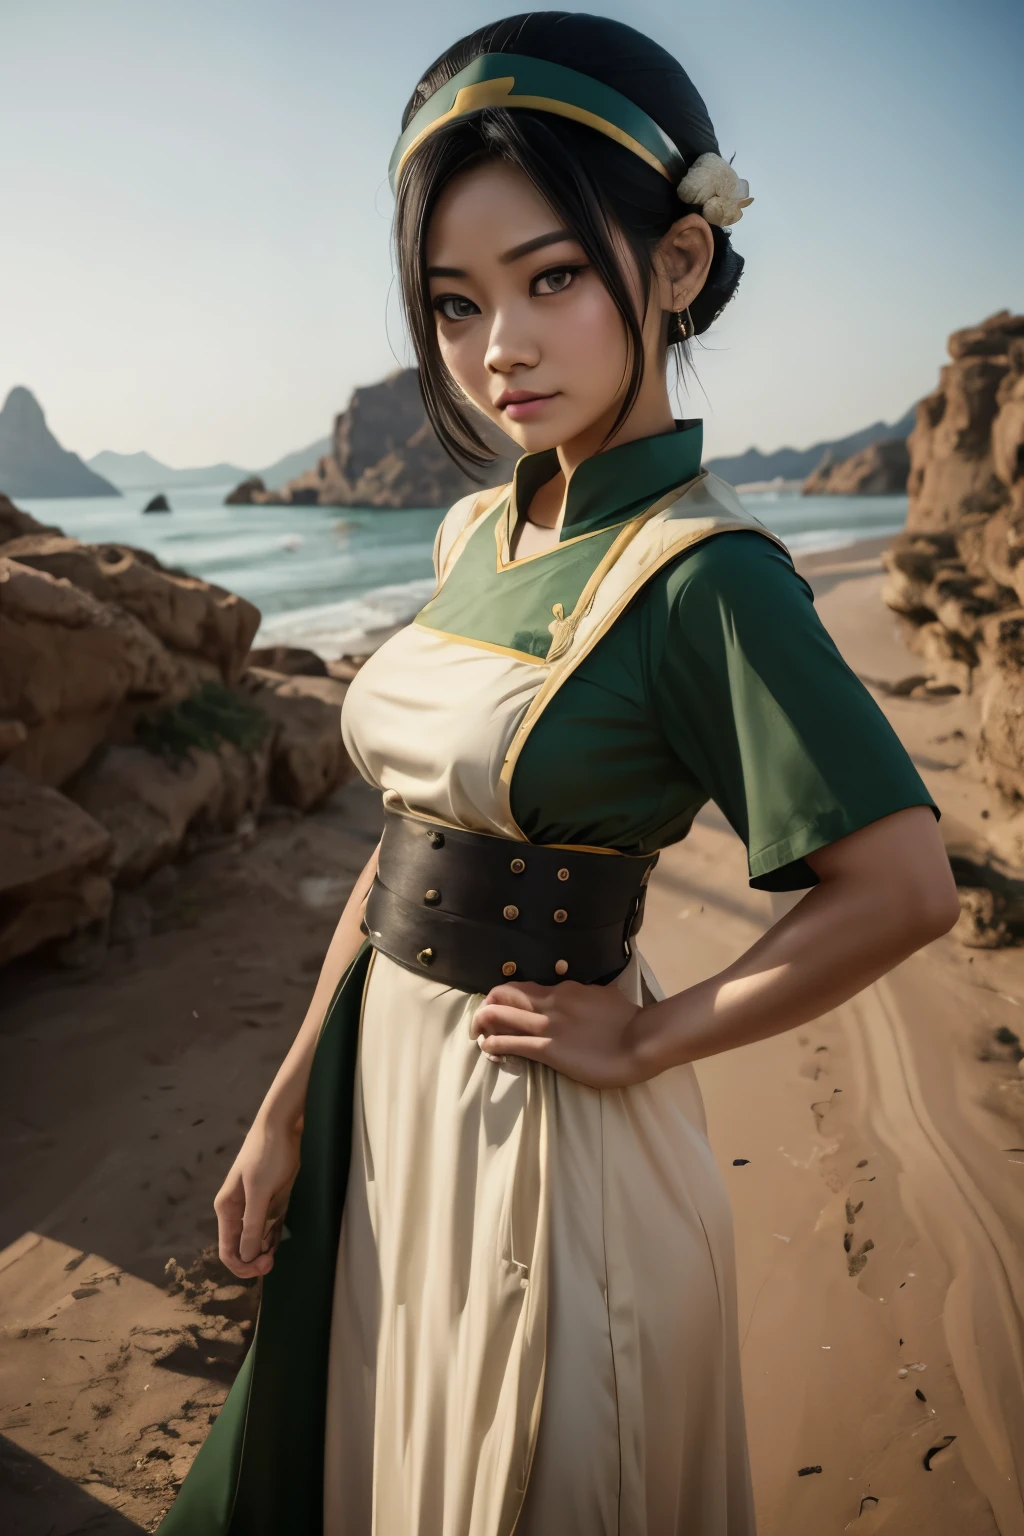 Toph beifong from avatar, ((Toph beigong)), earthbender clothes, earth tribe clothes, toph clothes, large breasts and wide hips, perfect and full lips, round grat eyes looking at the viewer, ((Lana Condor)), pale skin, curvy body,  avatar the legend of aang, avatar, earthbender background, black hair tied into a bun with a headband , attention to detail, focus, sharpness, absurd details, realism, hyper focus, perfect fingers, well-drawn lips, clear face, colors in tone pastel, fhd, 4k, high resolution, dynamic poses, clear faces, soft expressions, gentle smile  